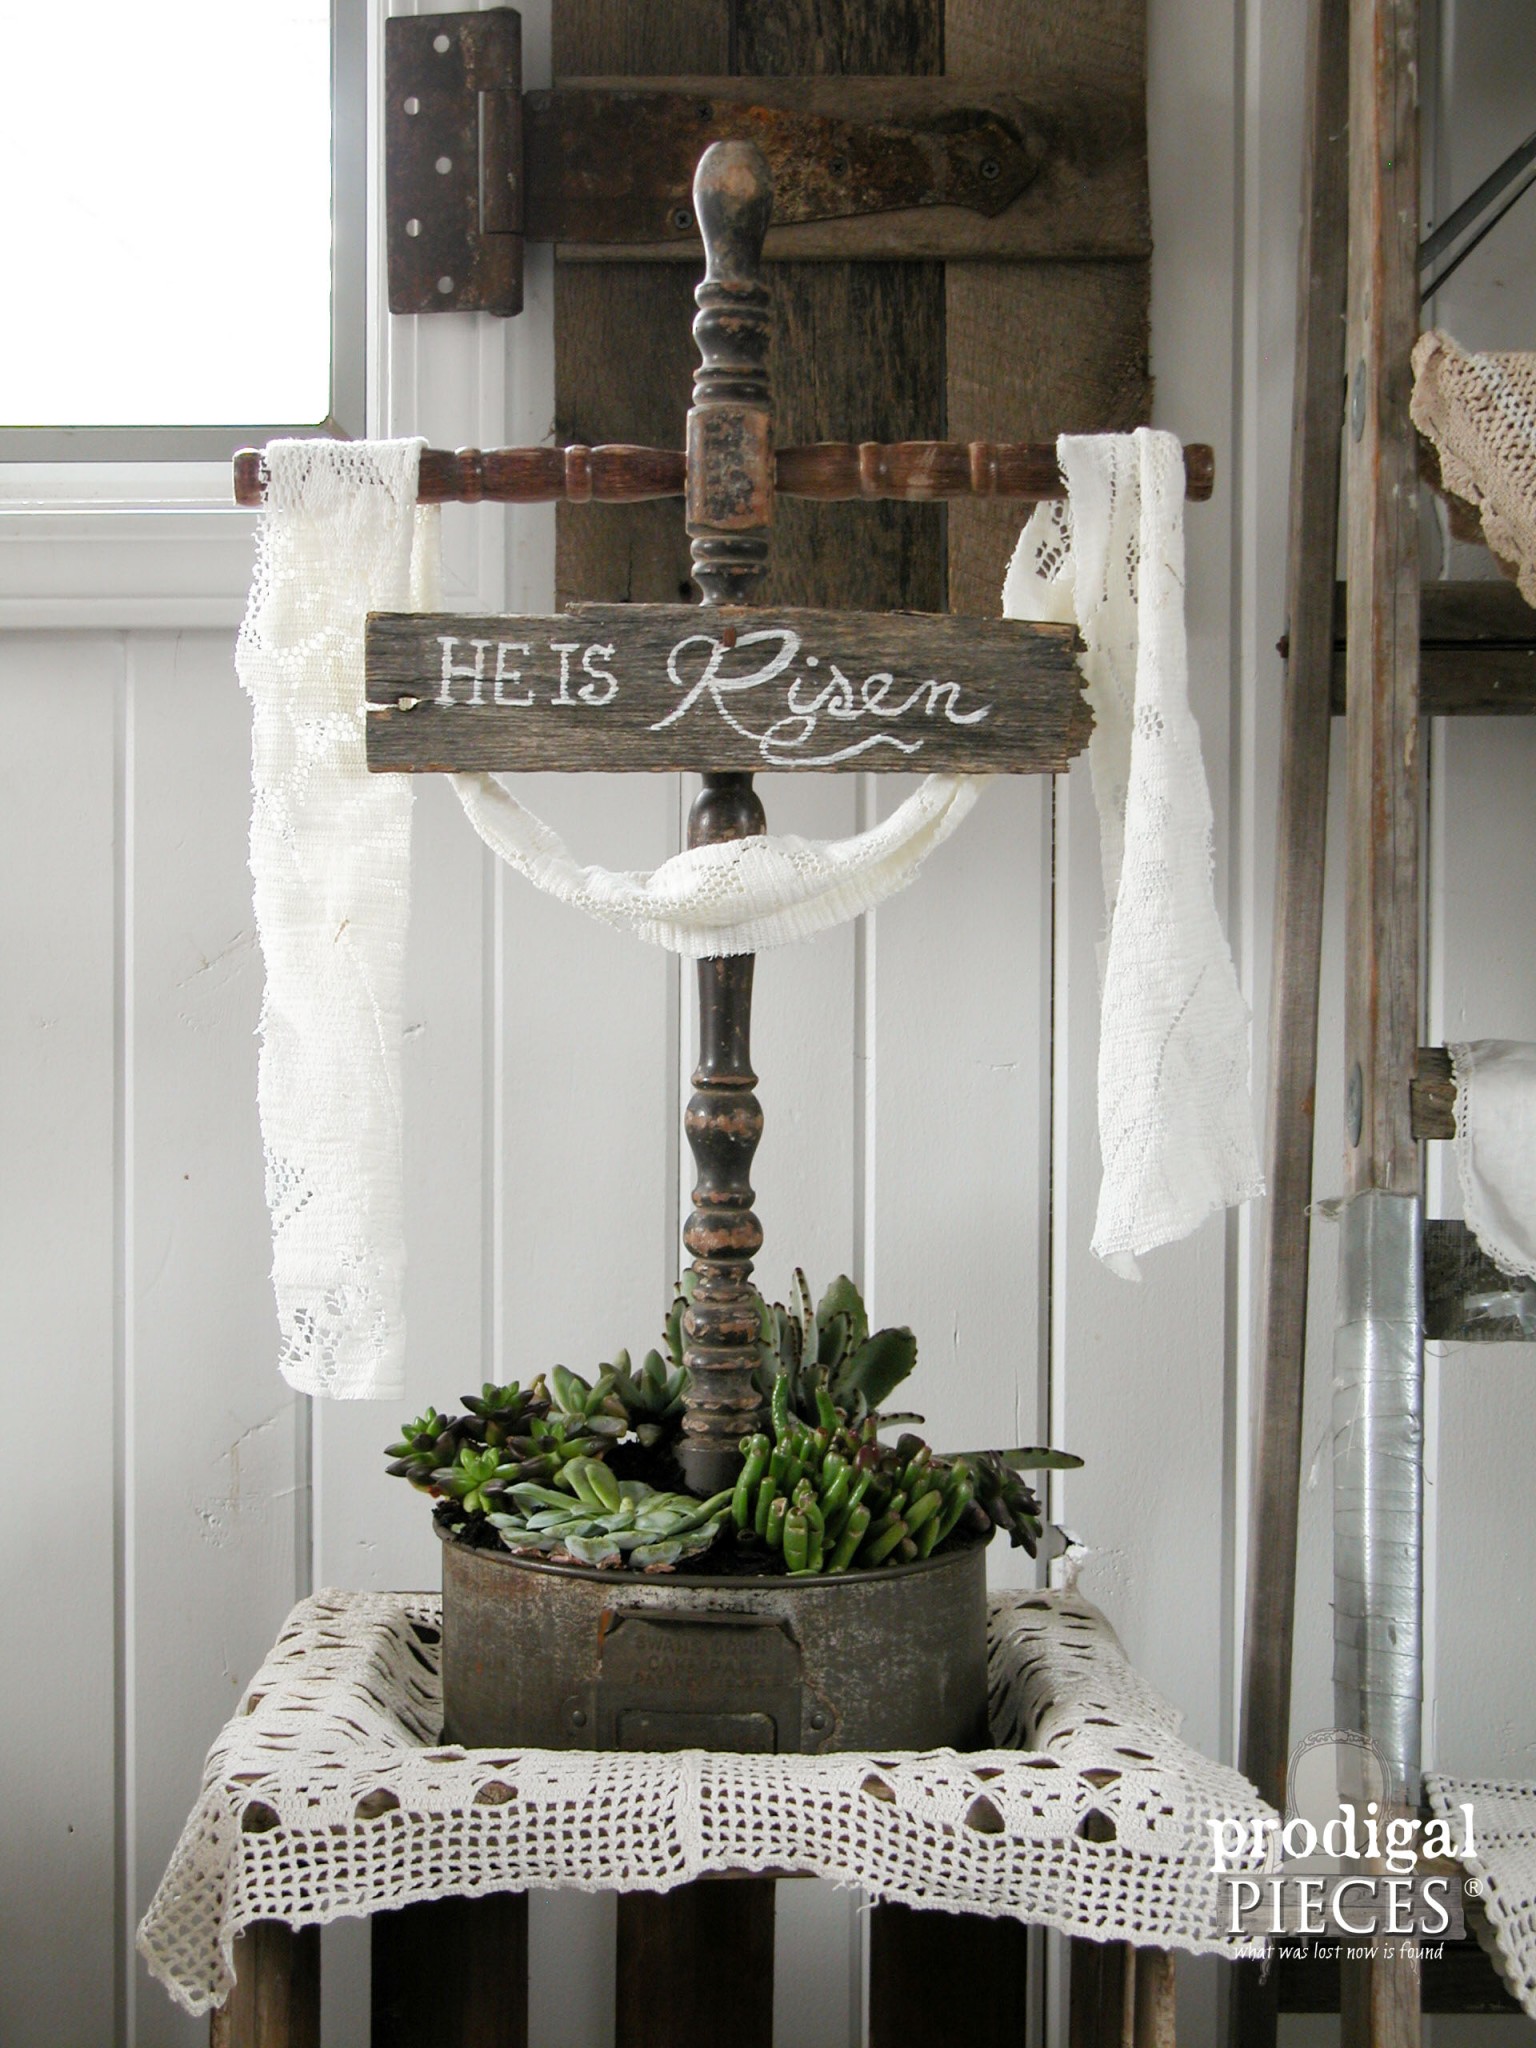 Repurposed Easter Cross from Salvaged Junk by Prodigal Pieces | www.prodigalpieces.com